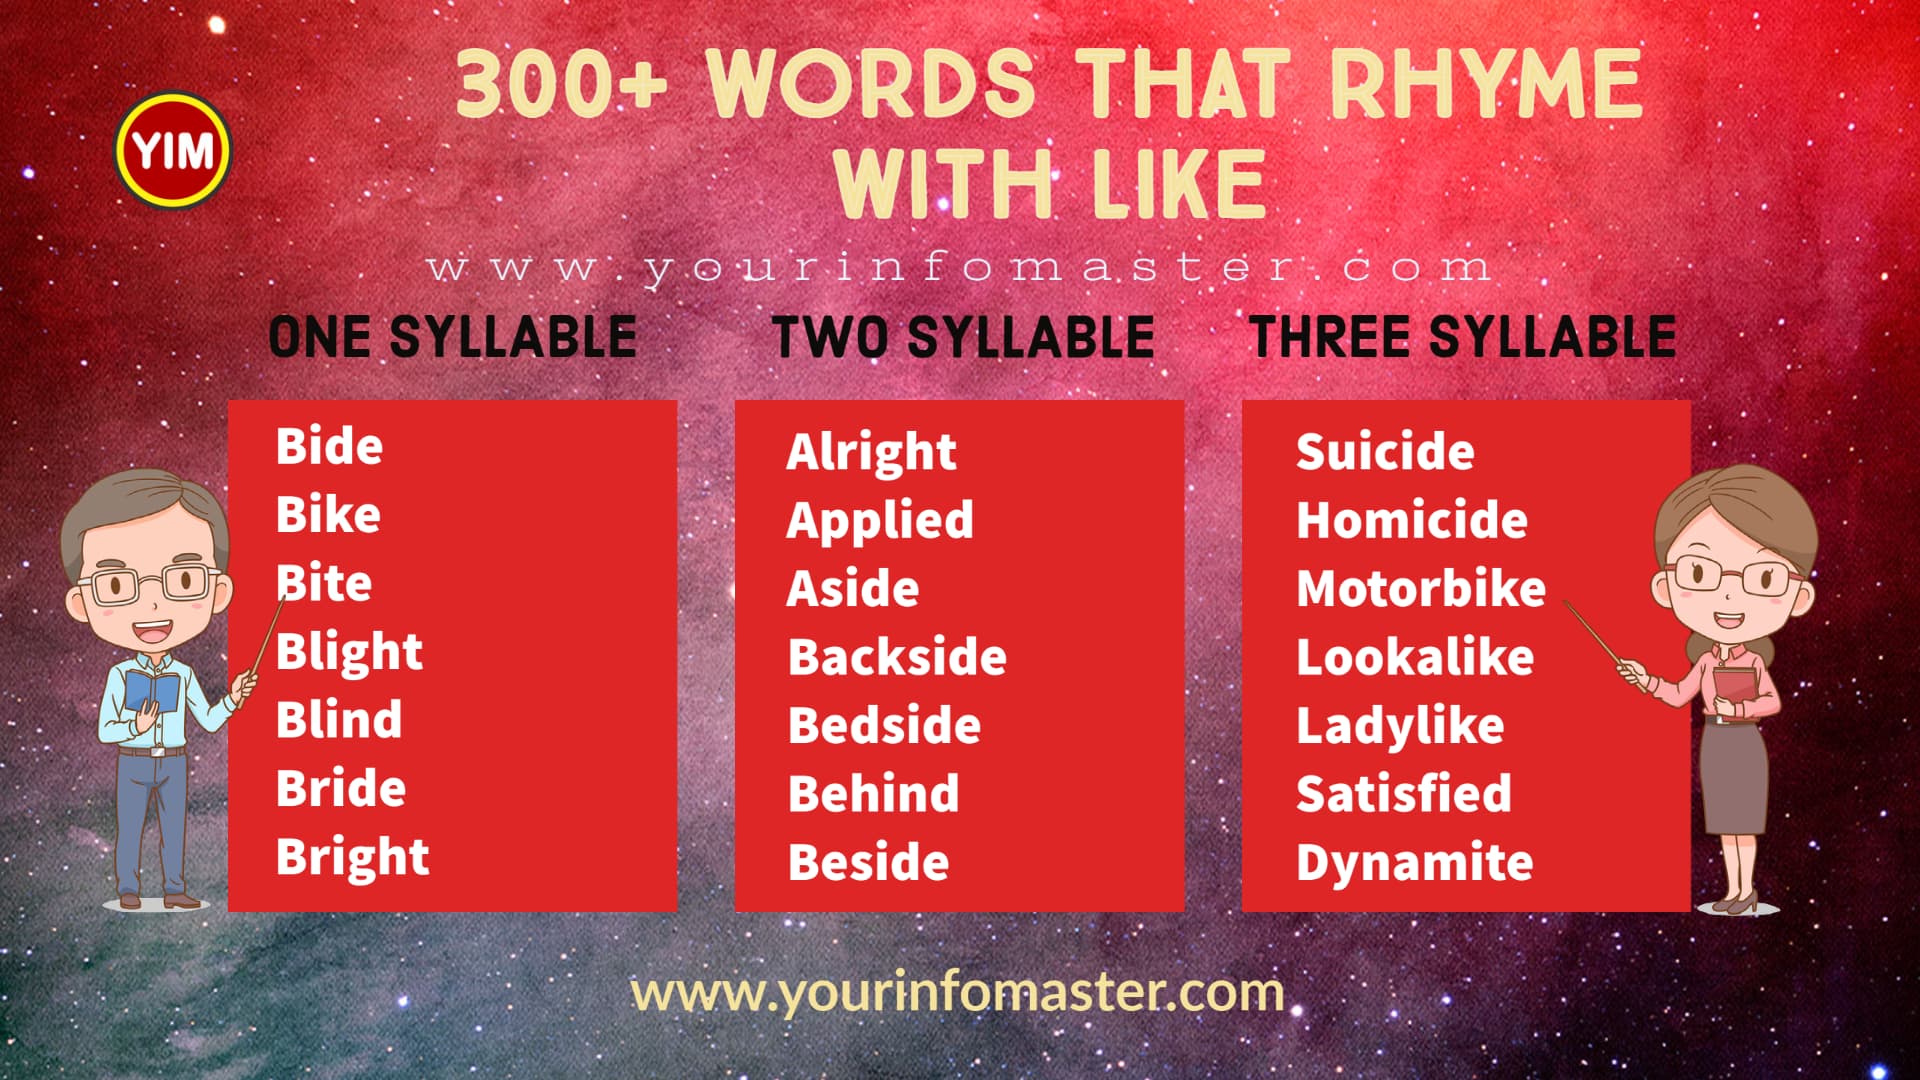 100 rhyming words, 1000 rhyming words, 200+ Interesting Words, 200+ Useful Words, 300 rhyming words list, 50 rhyming words list, 500 rhyming words, all words that rhyme with Like, Another word for Like, are rhyming words, how to teach rhyming words, Interesting Words that Rhyme in English, Like rhyme, Like rhyme examples, Like Rhyming words, Printable Infographics, Printable Worksheets, rhymes English words, rhymes with Like infographics, rhyming pairs, Rhyming Words, Rhyming Words for Kids, rhyming words for Like, Rhyming Words List, Things that rhyme with Like, what are rhyming words, what rhymes with Like, words rhyming with Like, Words that Rhyme, Words That Rhyme with Like